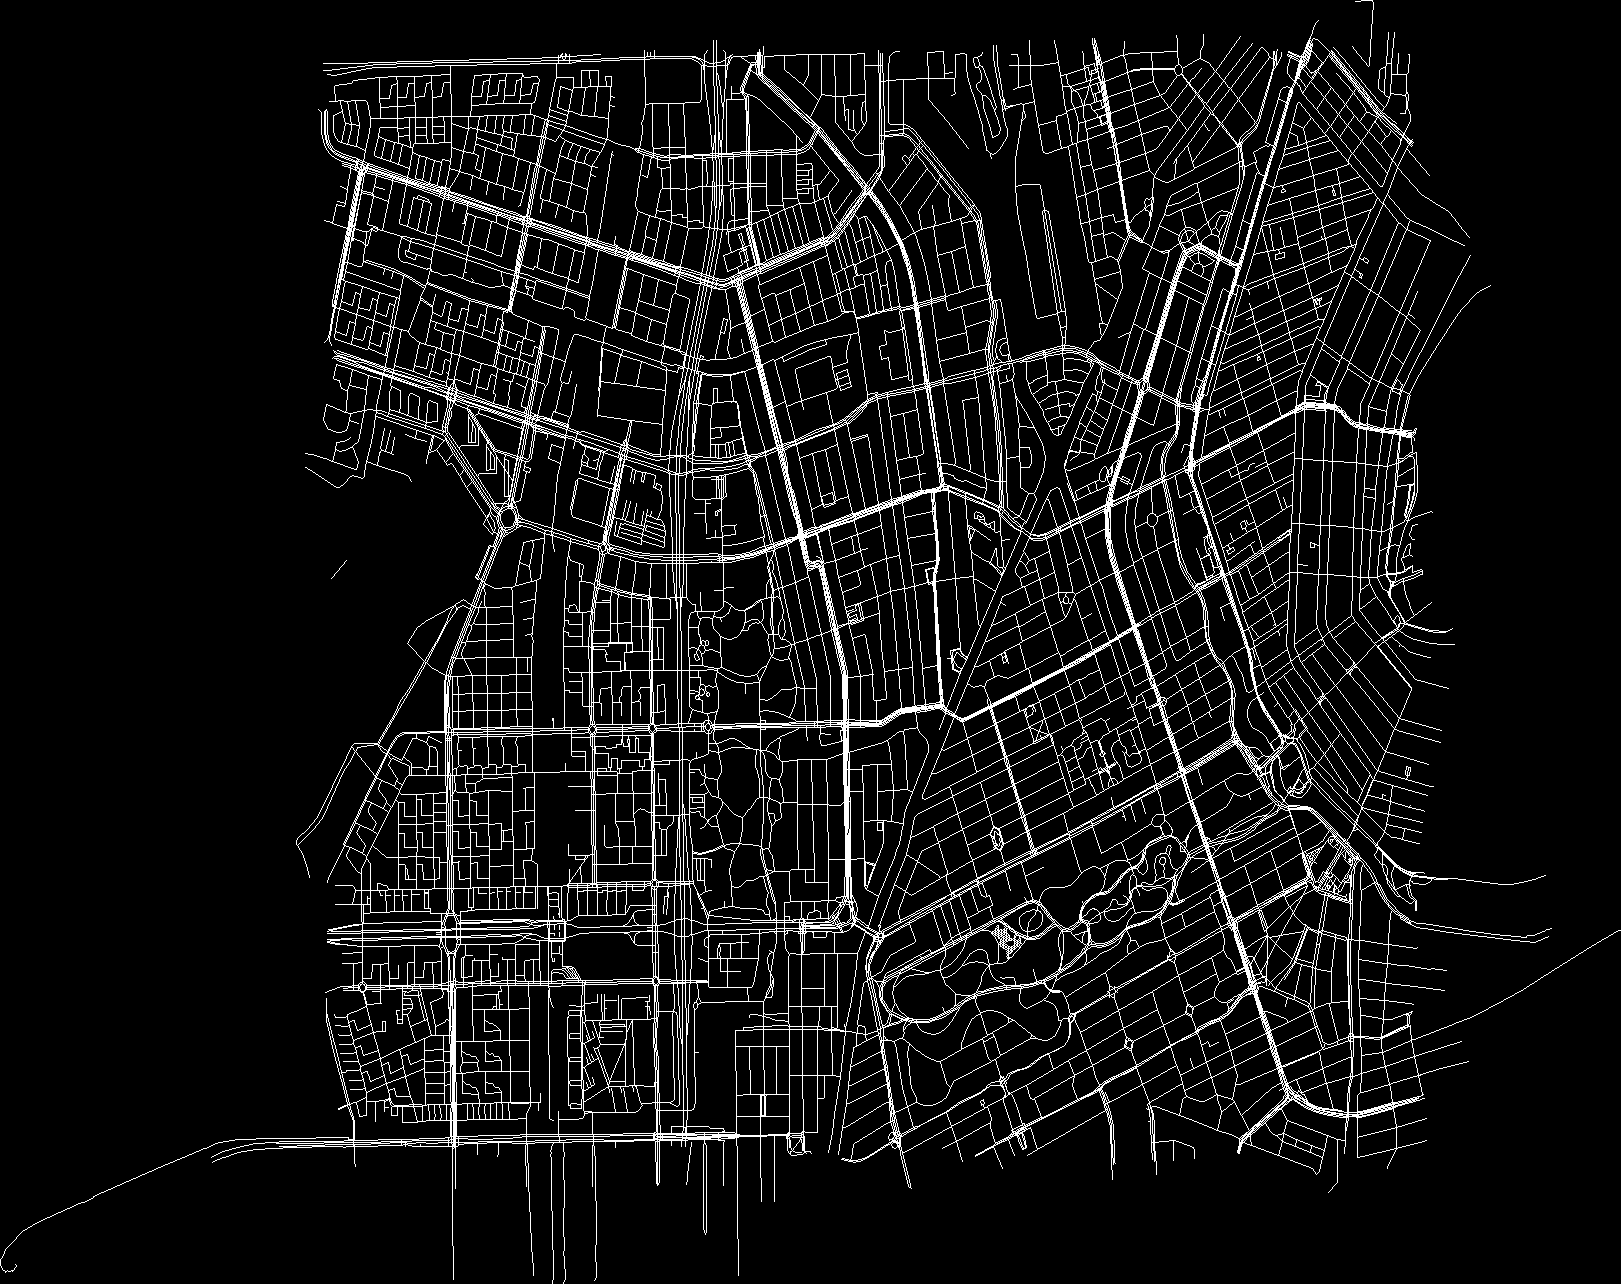 Highways in the city of Amsterdam